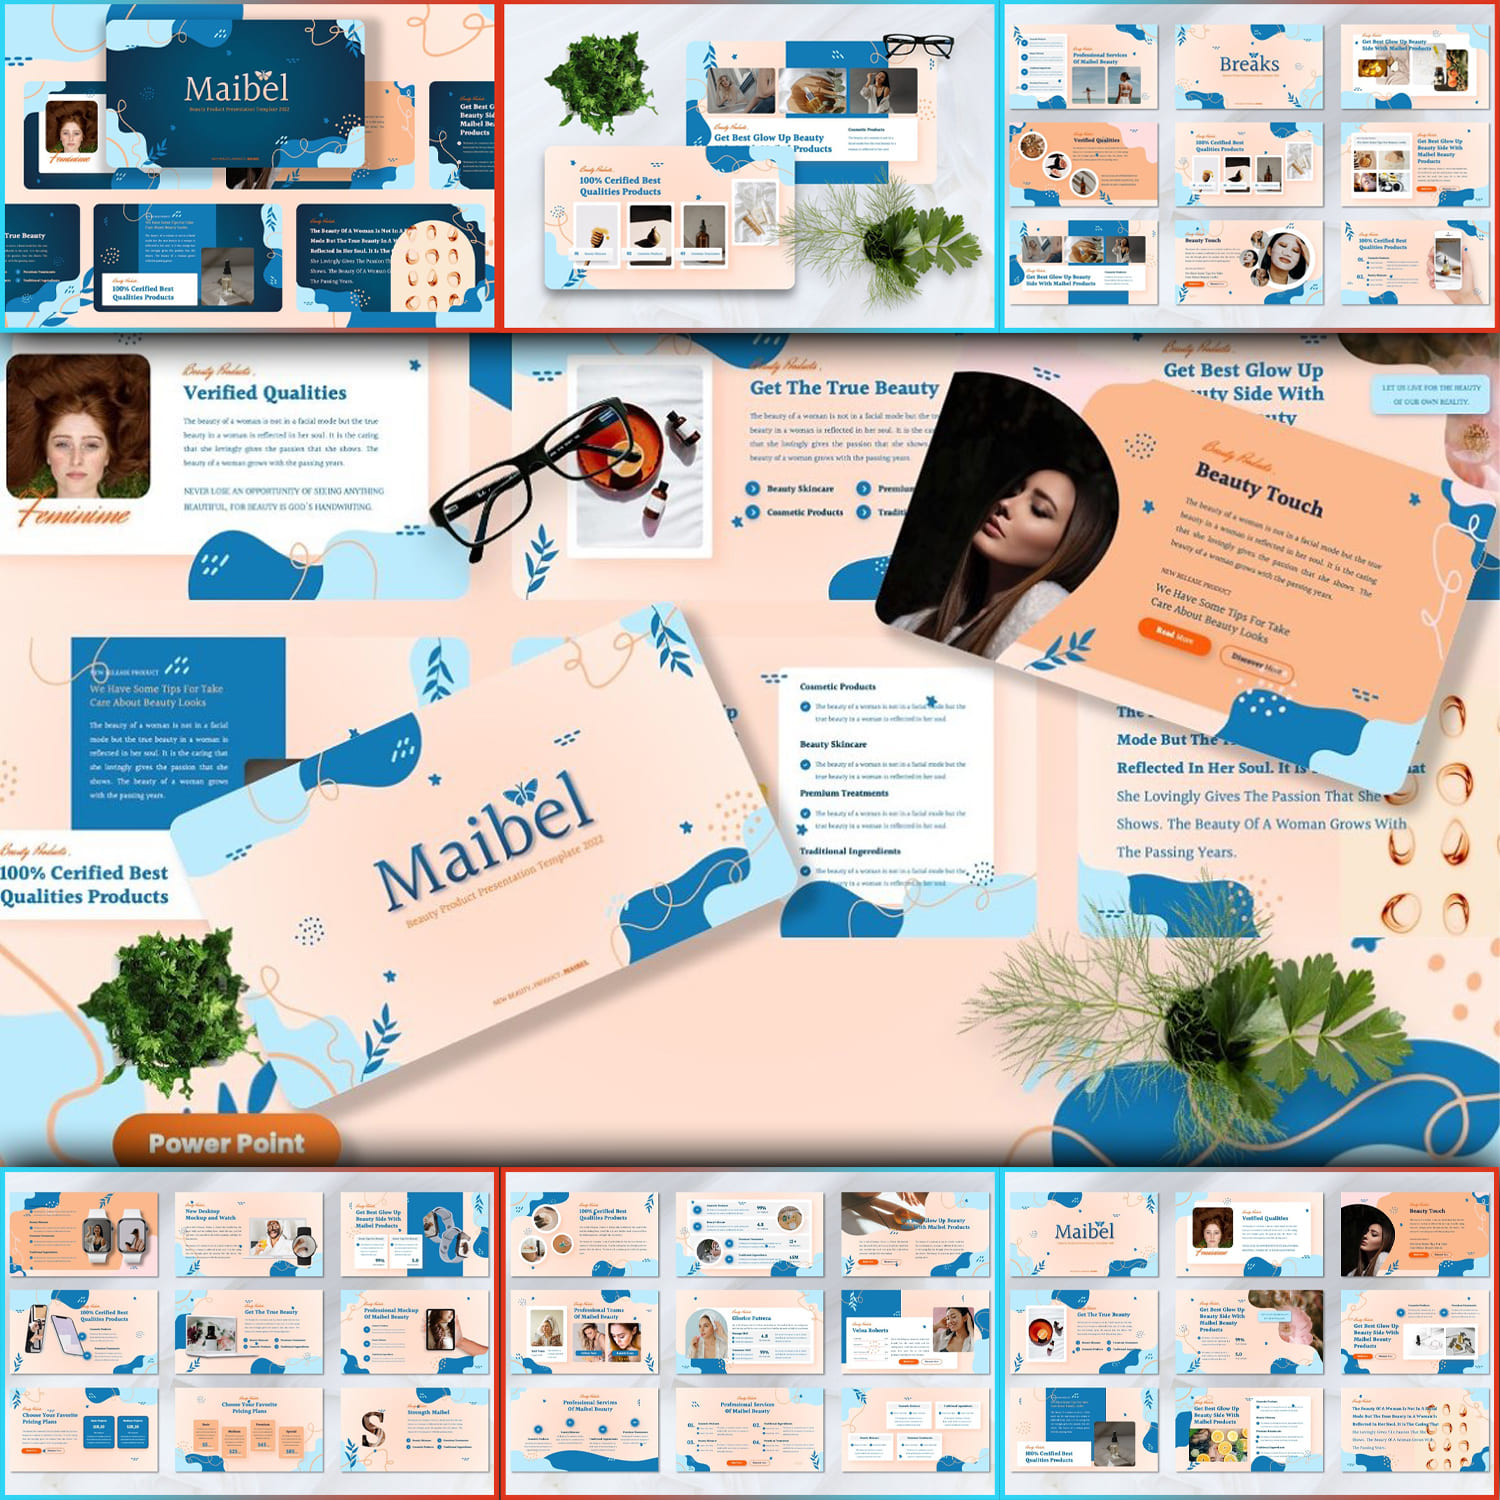 Maibel beauty products powerpoint 1500x1500.